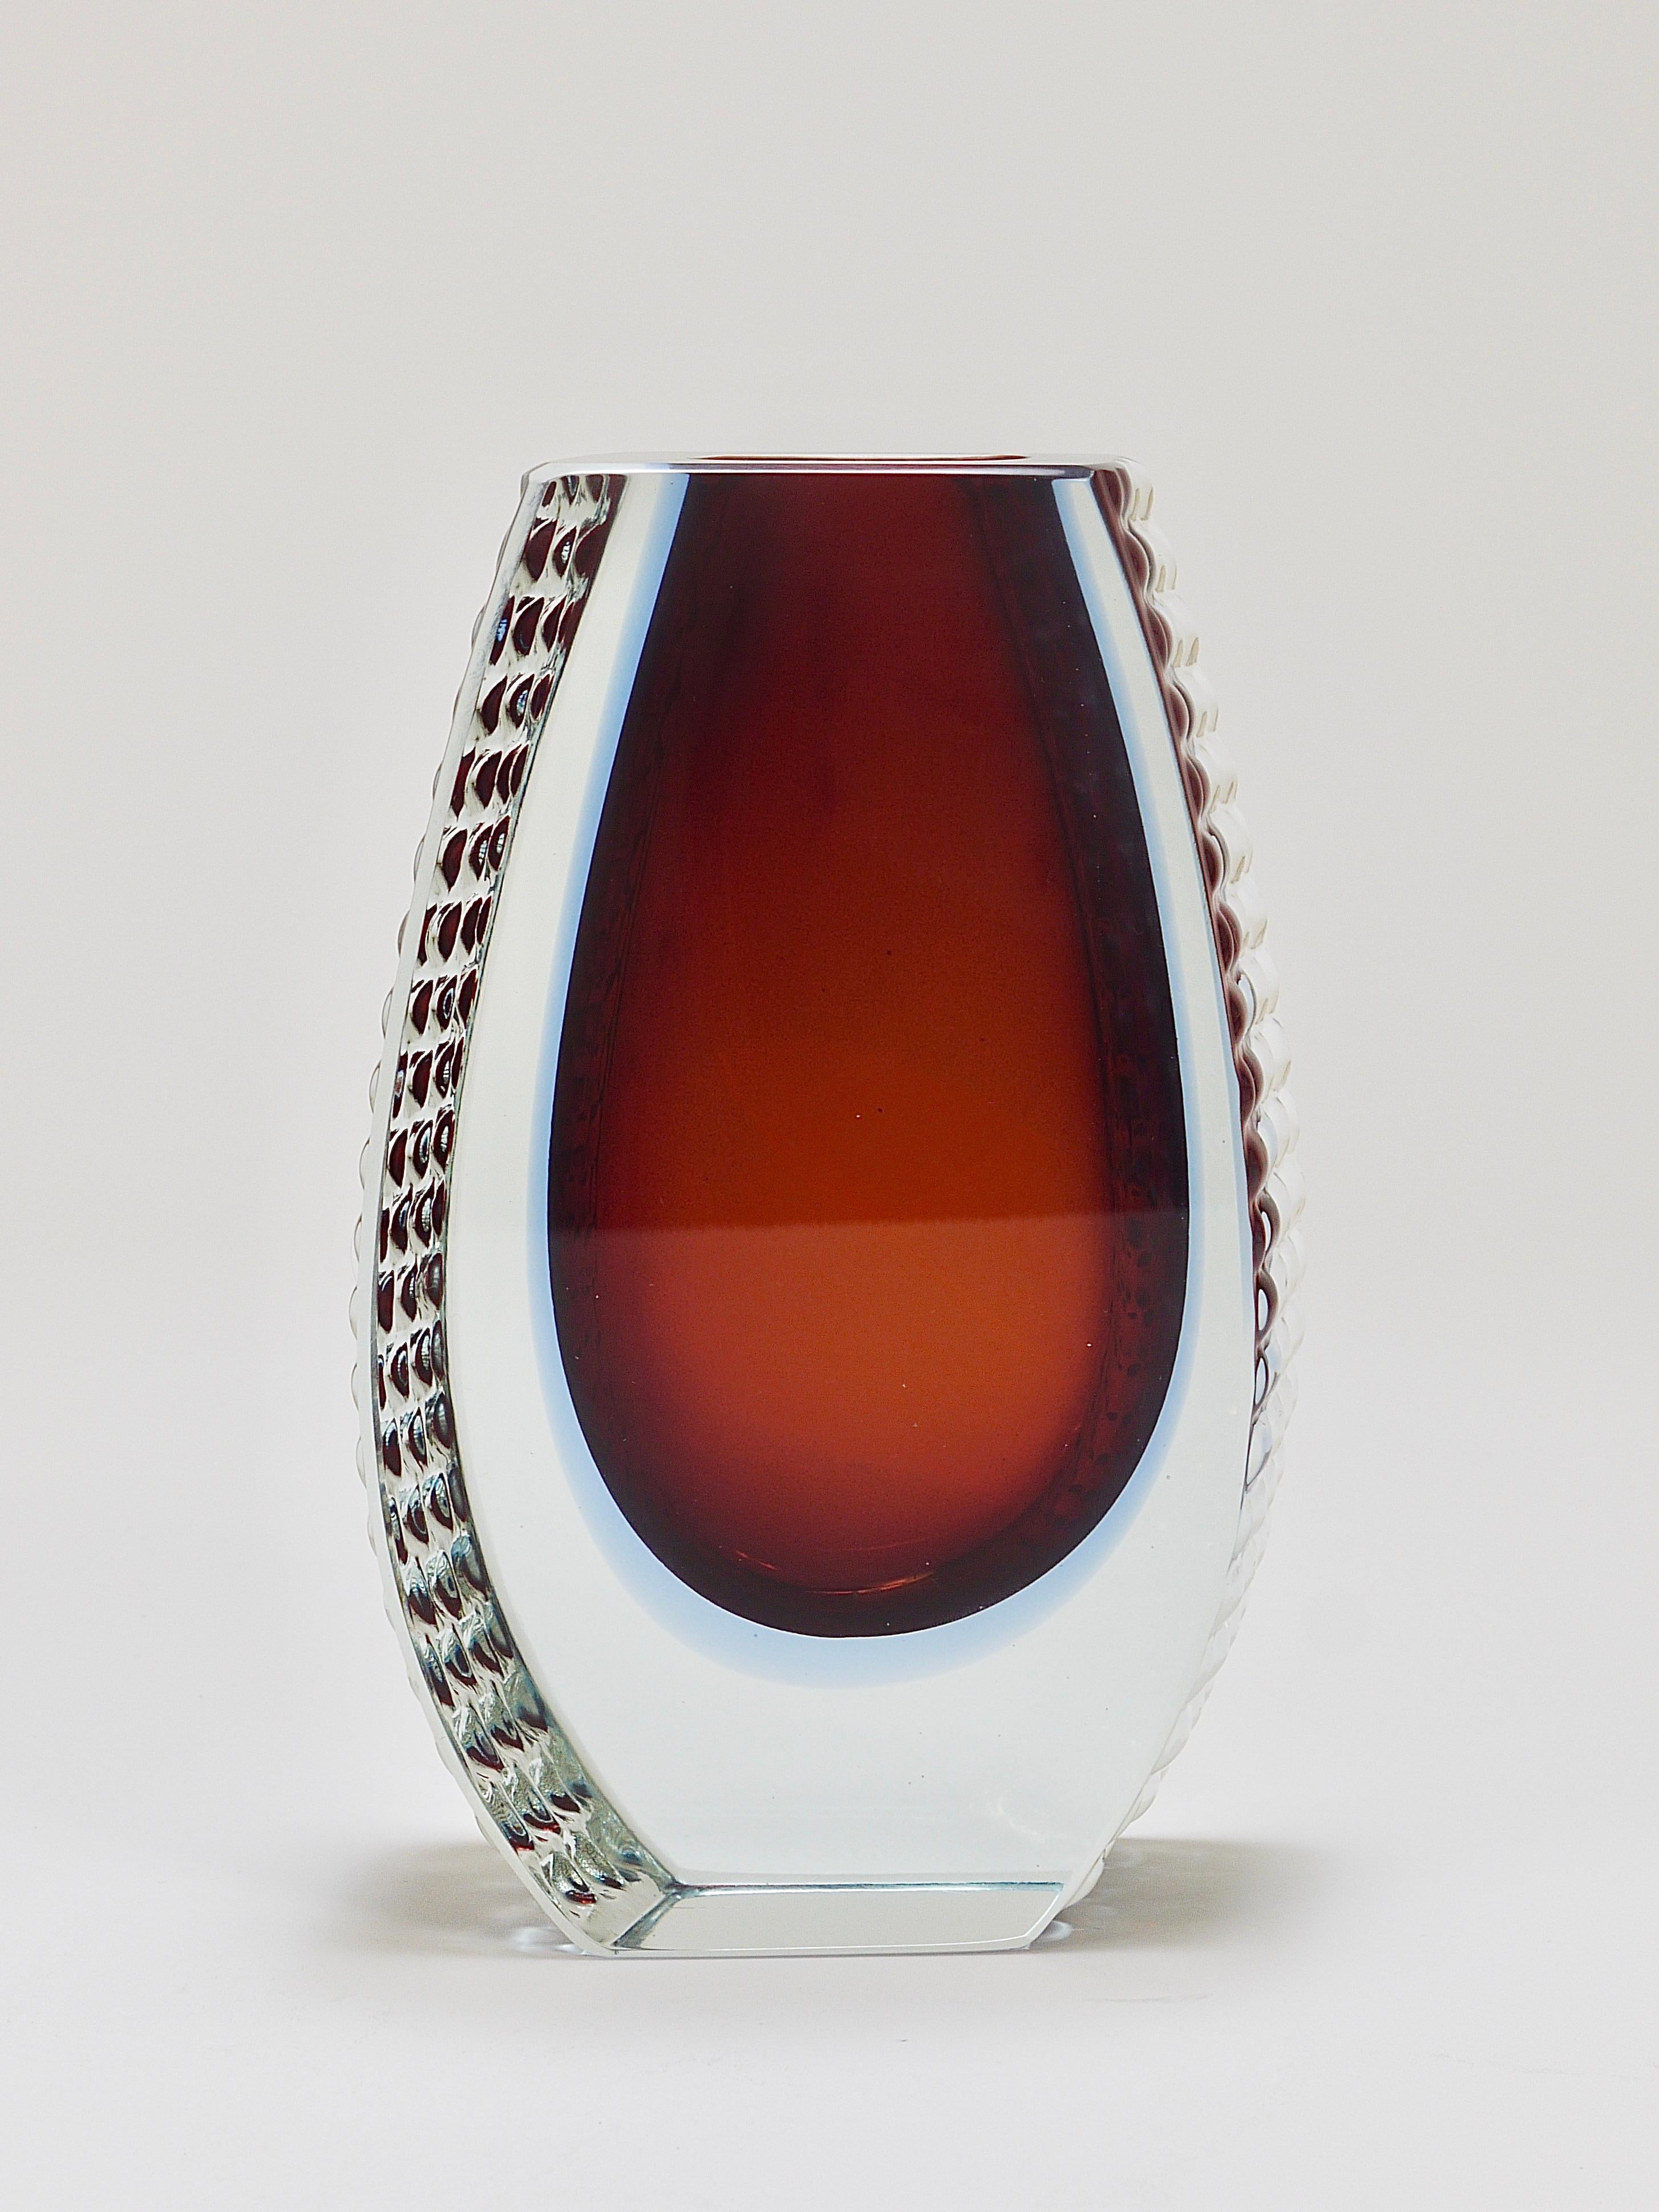 A beautiful and solid Italian Murano glass vase from the 1970s by Alessandro Mandruzzato. It has a wonderful asymmetrical shape with a polished front and back and textured ice glass sides. This is a large sample with a height of 8 in. Handmade with